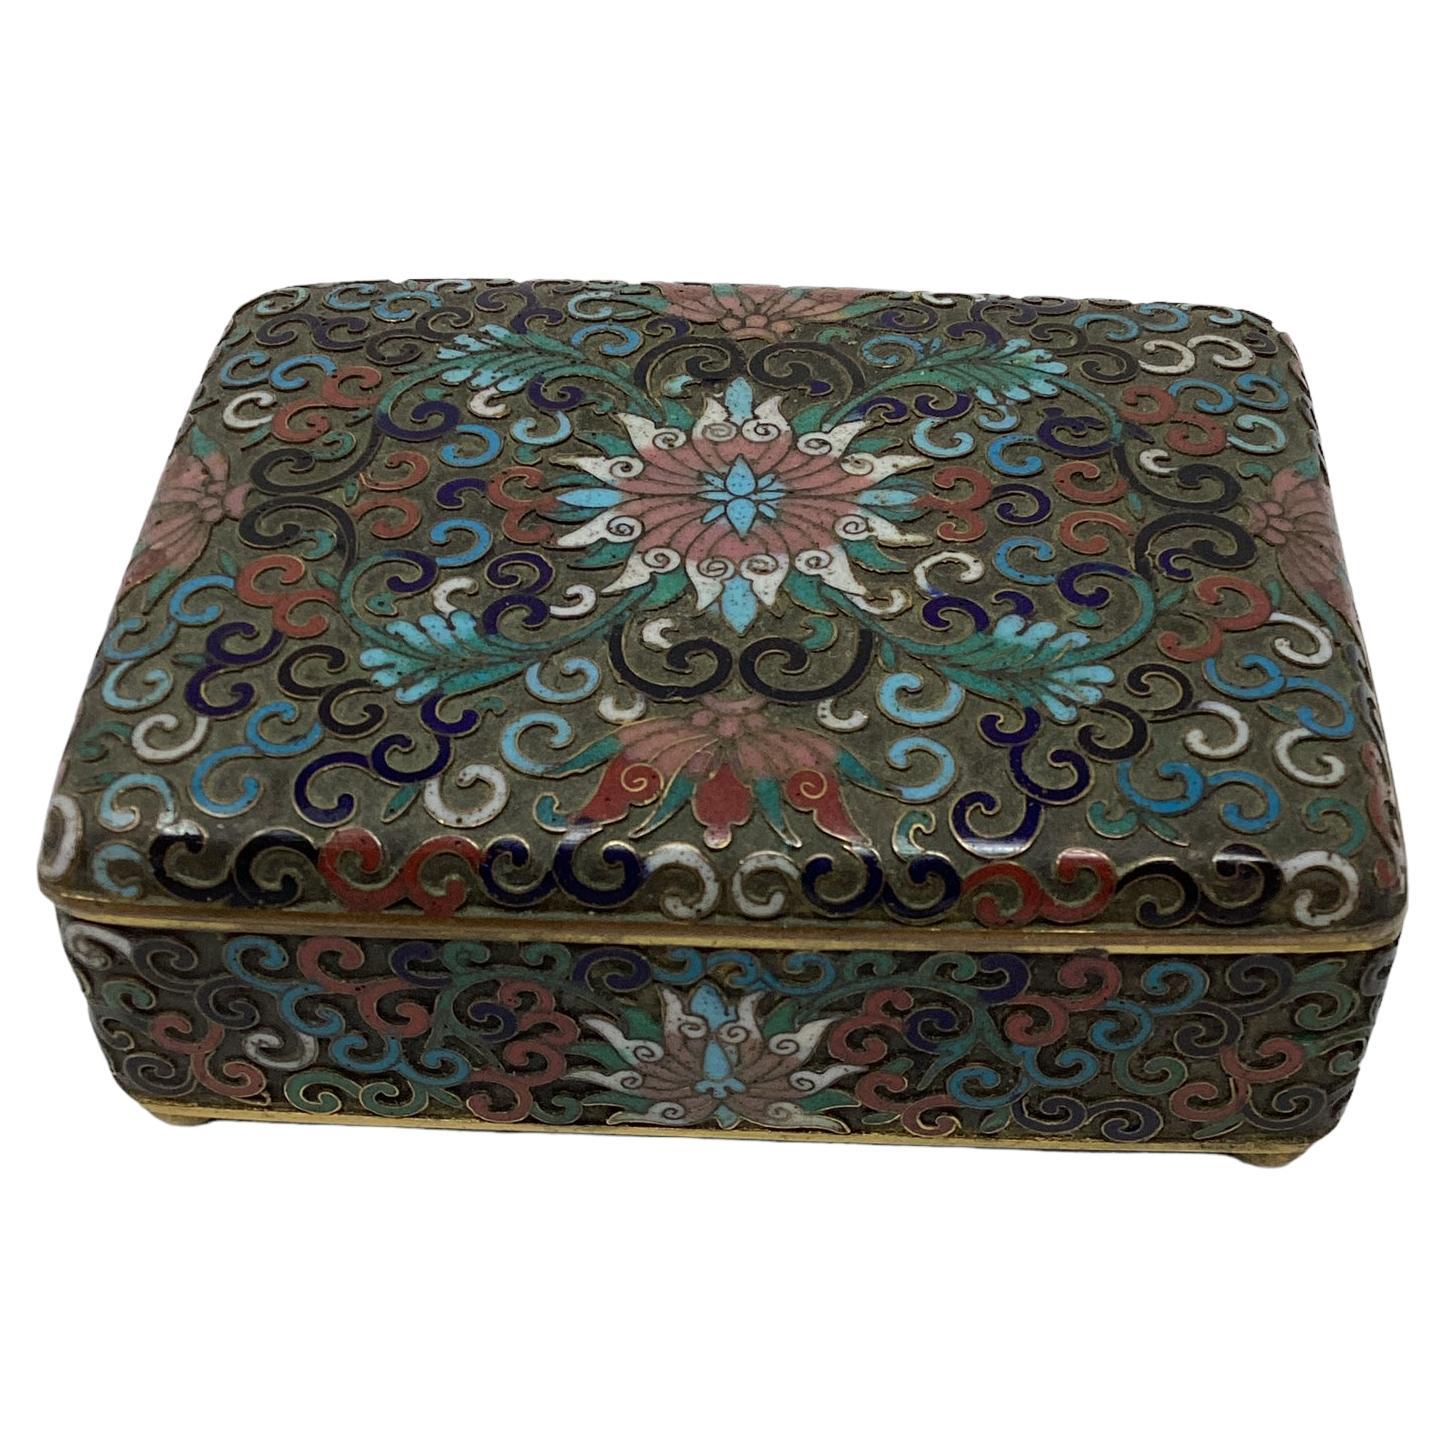 Chinese Export Cloisonné Box For Sale